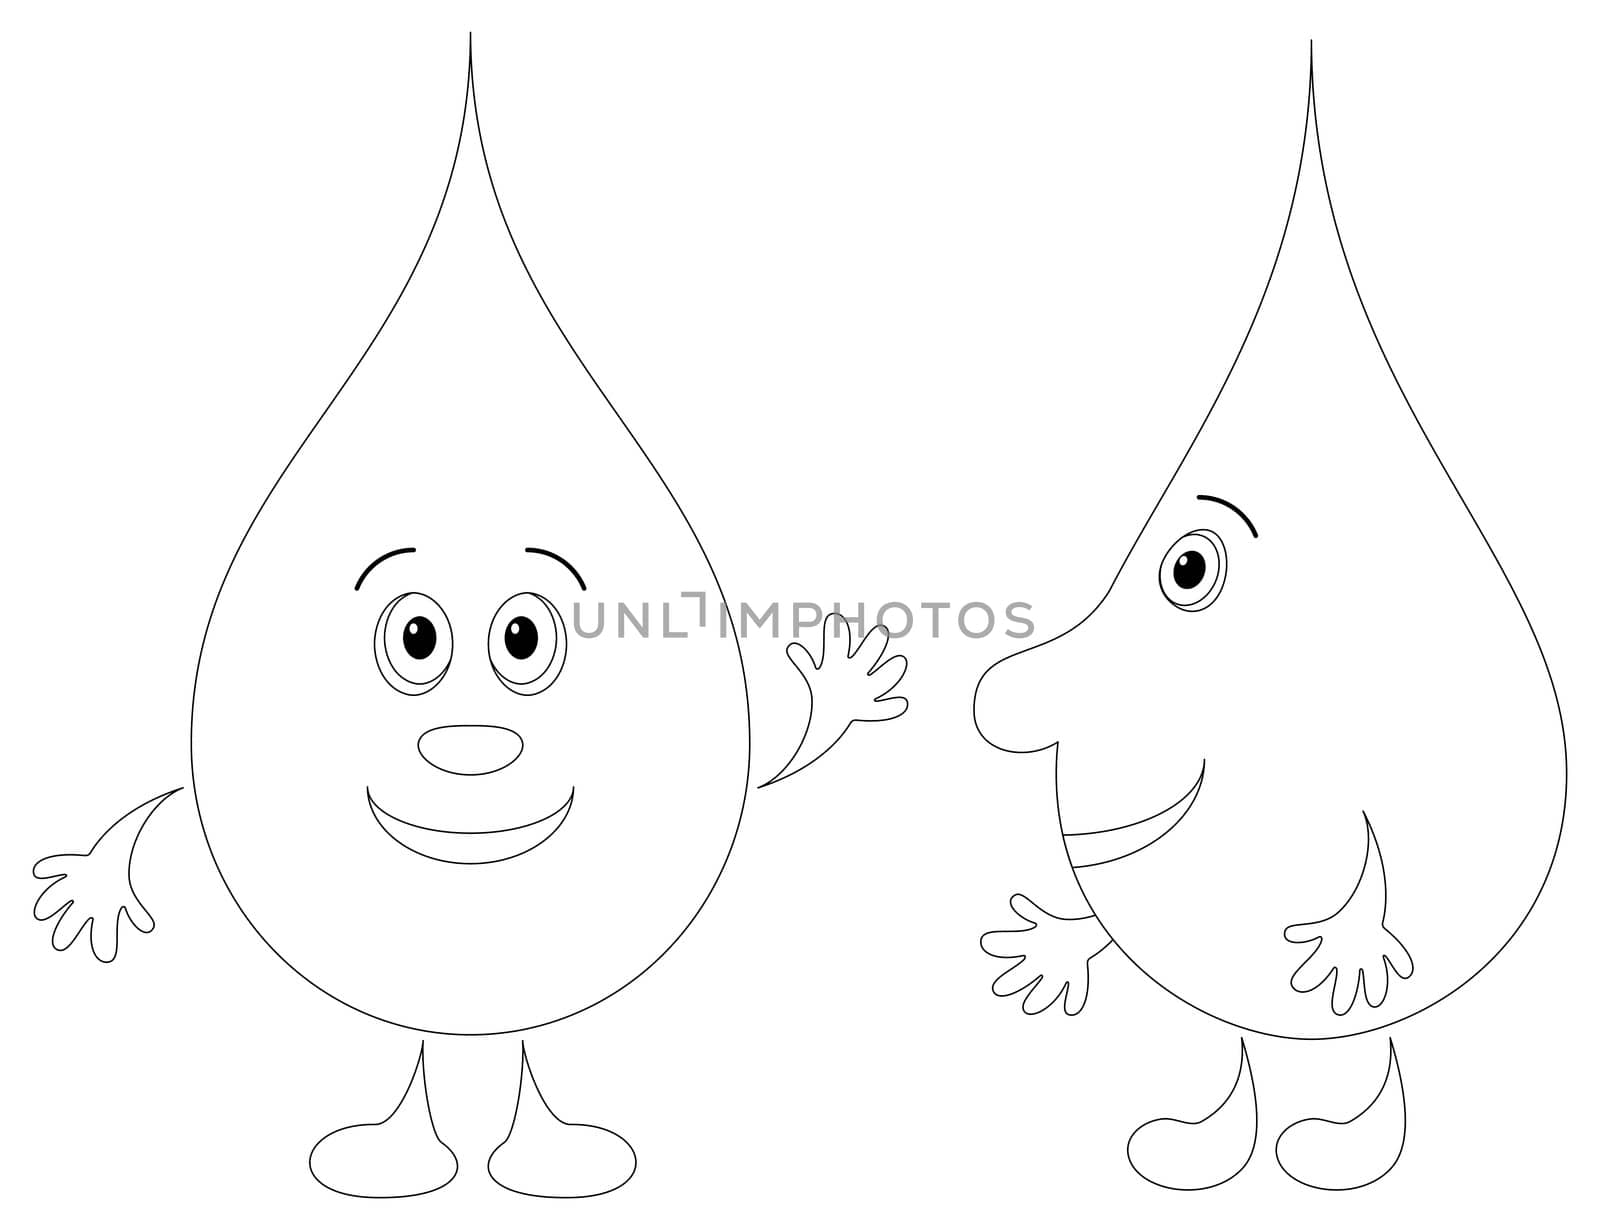 cartoon, contours: cheerful water drops friends have met and stretch each other hands